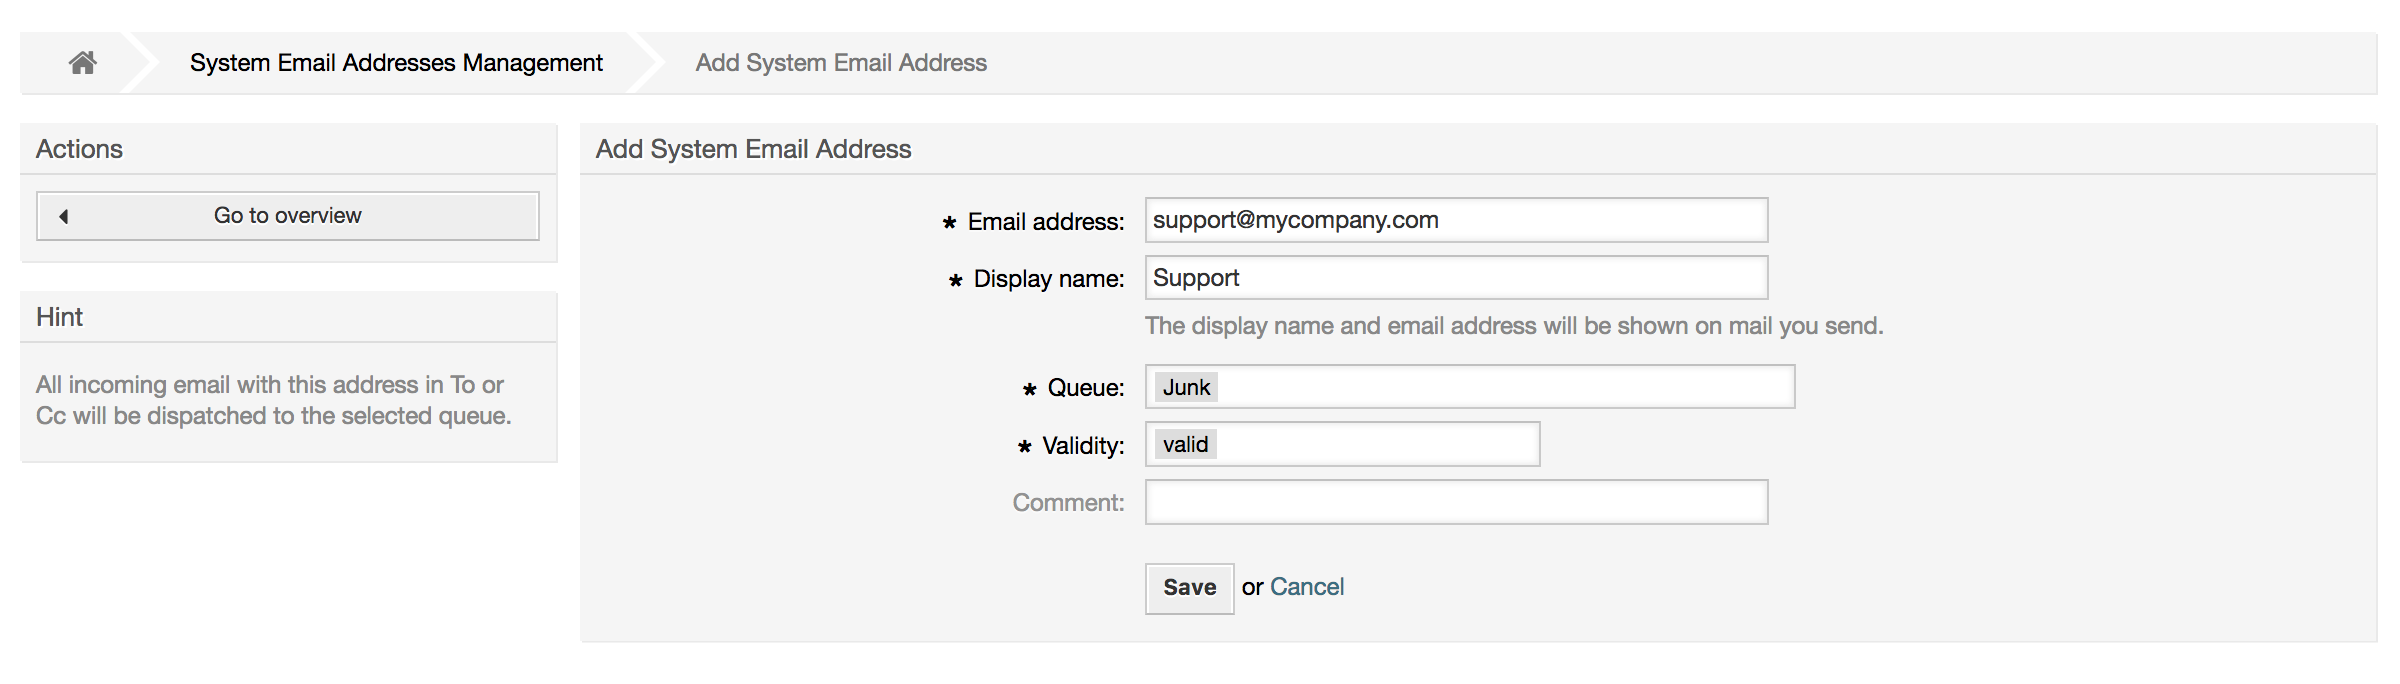 Adding a system email address